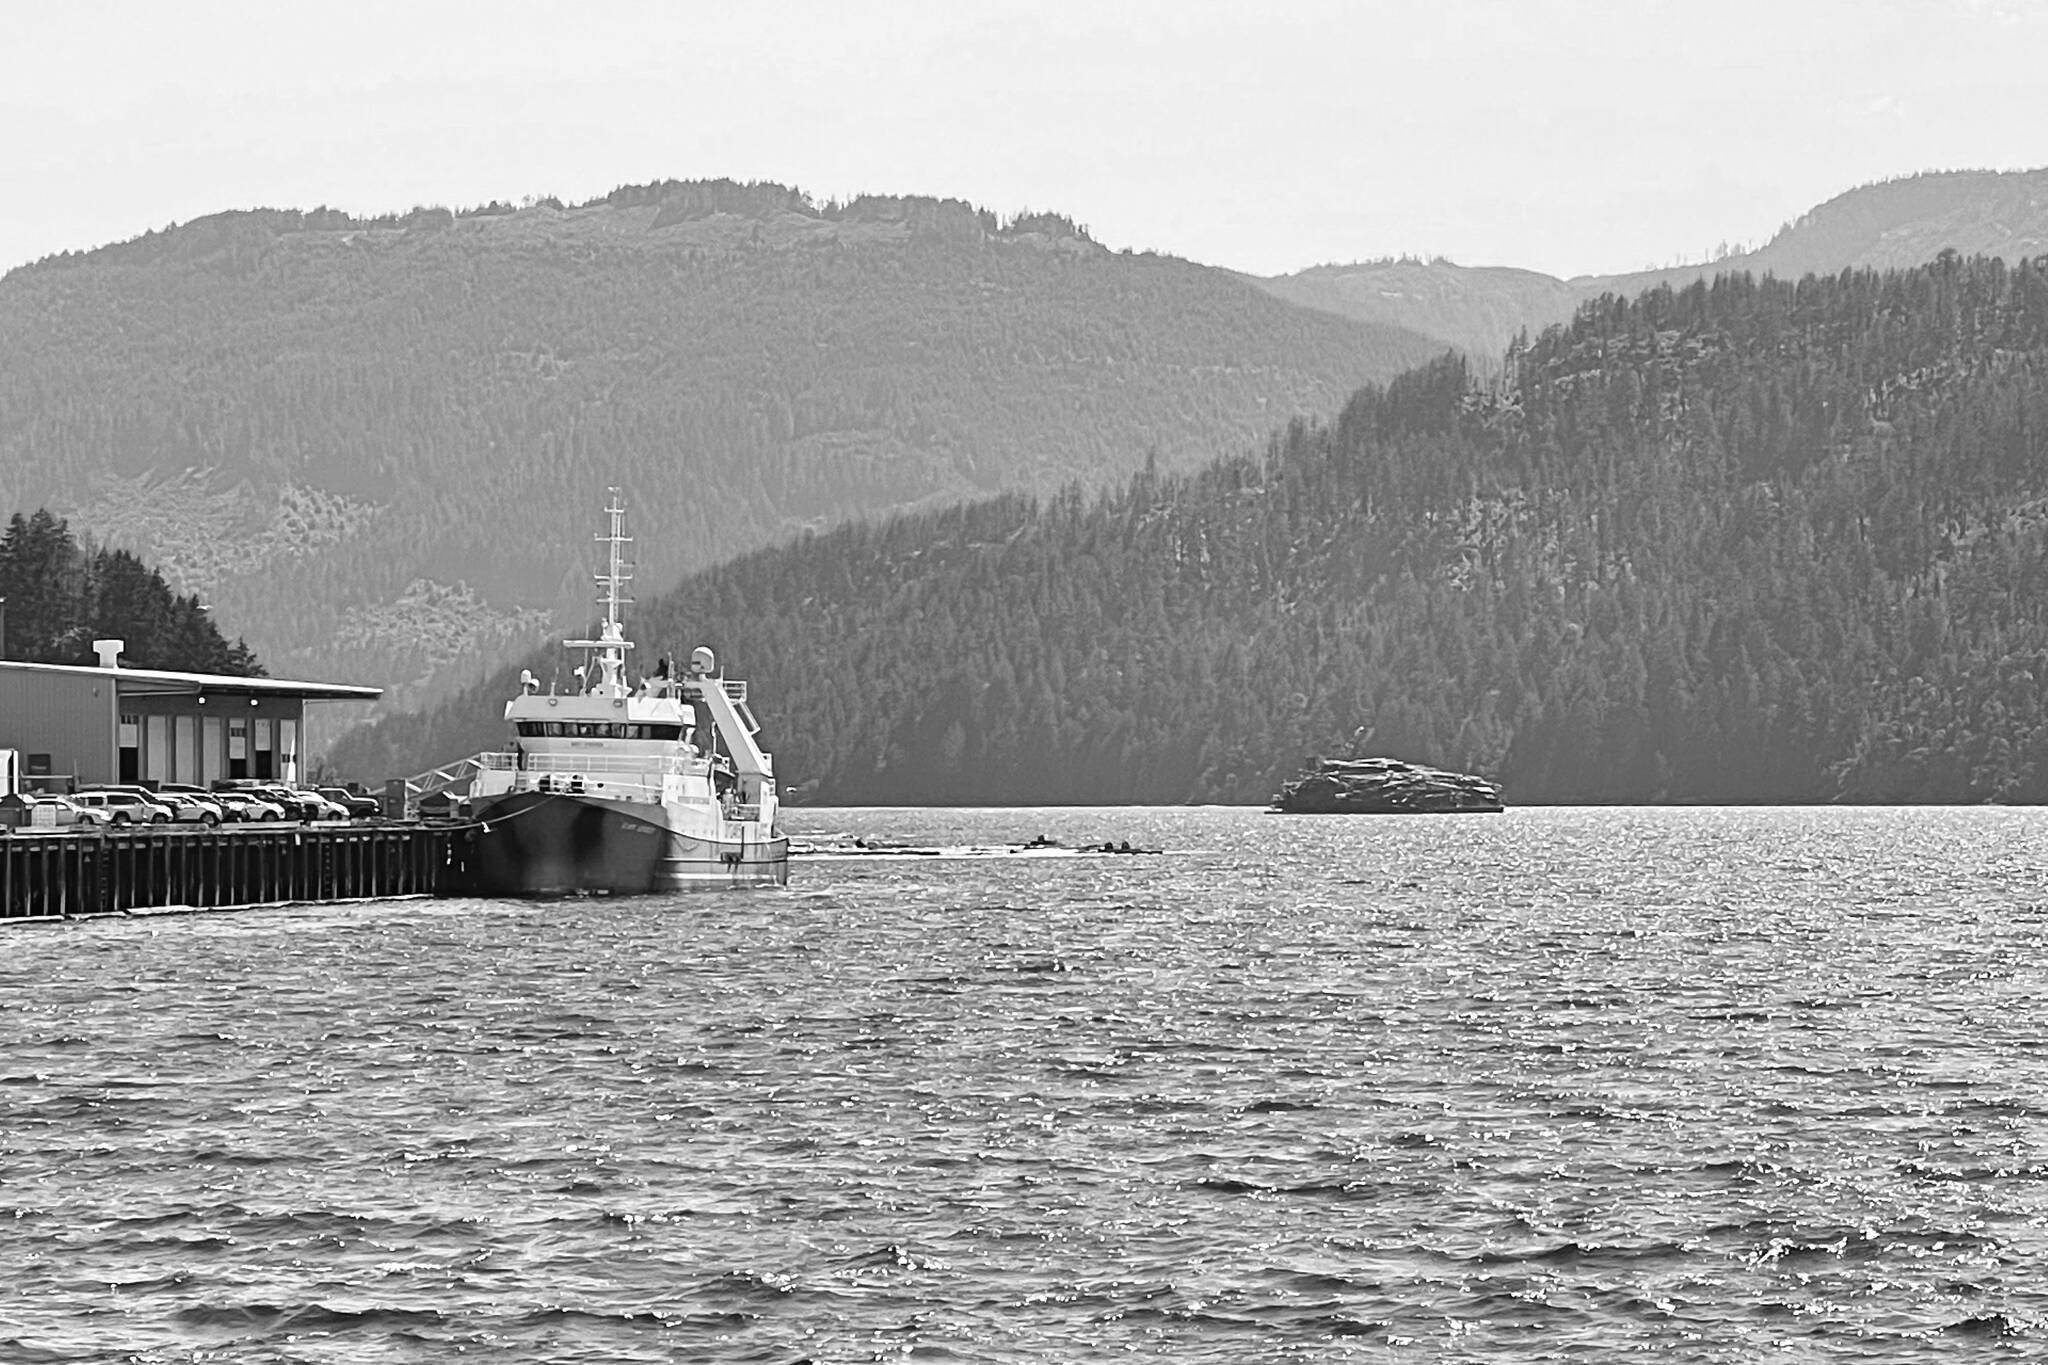 3:16 p.m. The trawler MV Raw Spirit is docked at Berth 2 at the Port Alberni Port Authority while a log barge passes in the middle of the Alberni Inlet. (SUSAN QUINN/ Alberni Valley News)